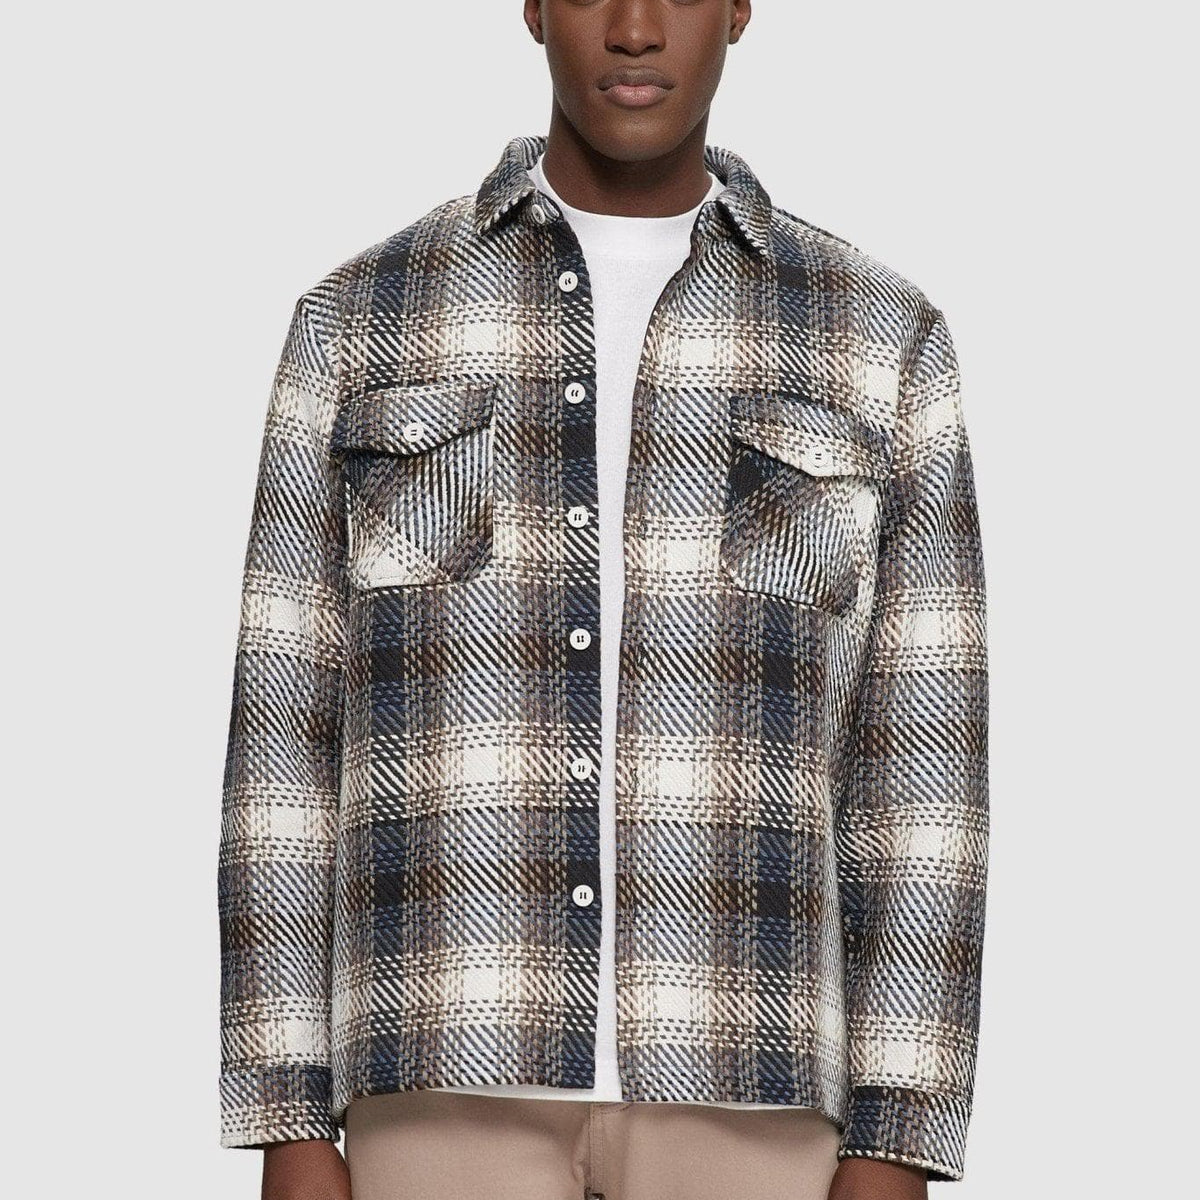 KUWALLA PLAID JACKET BROWN/BABY BLUE – PRIVATE SNEAKERS